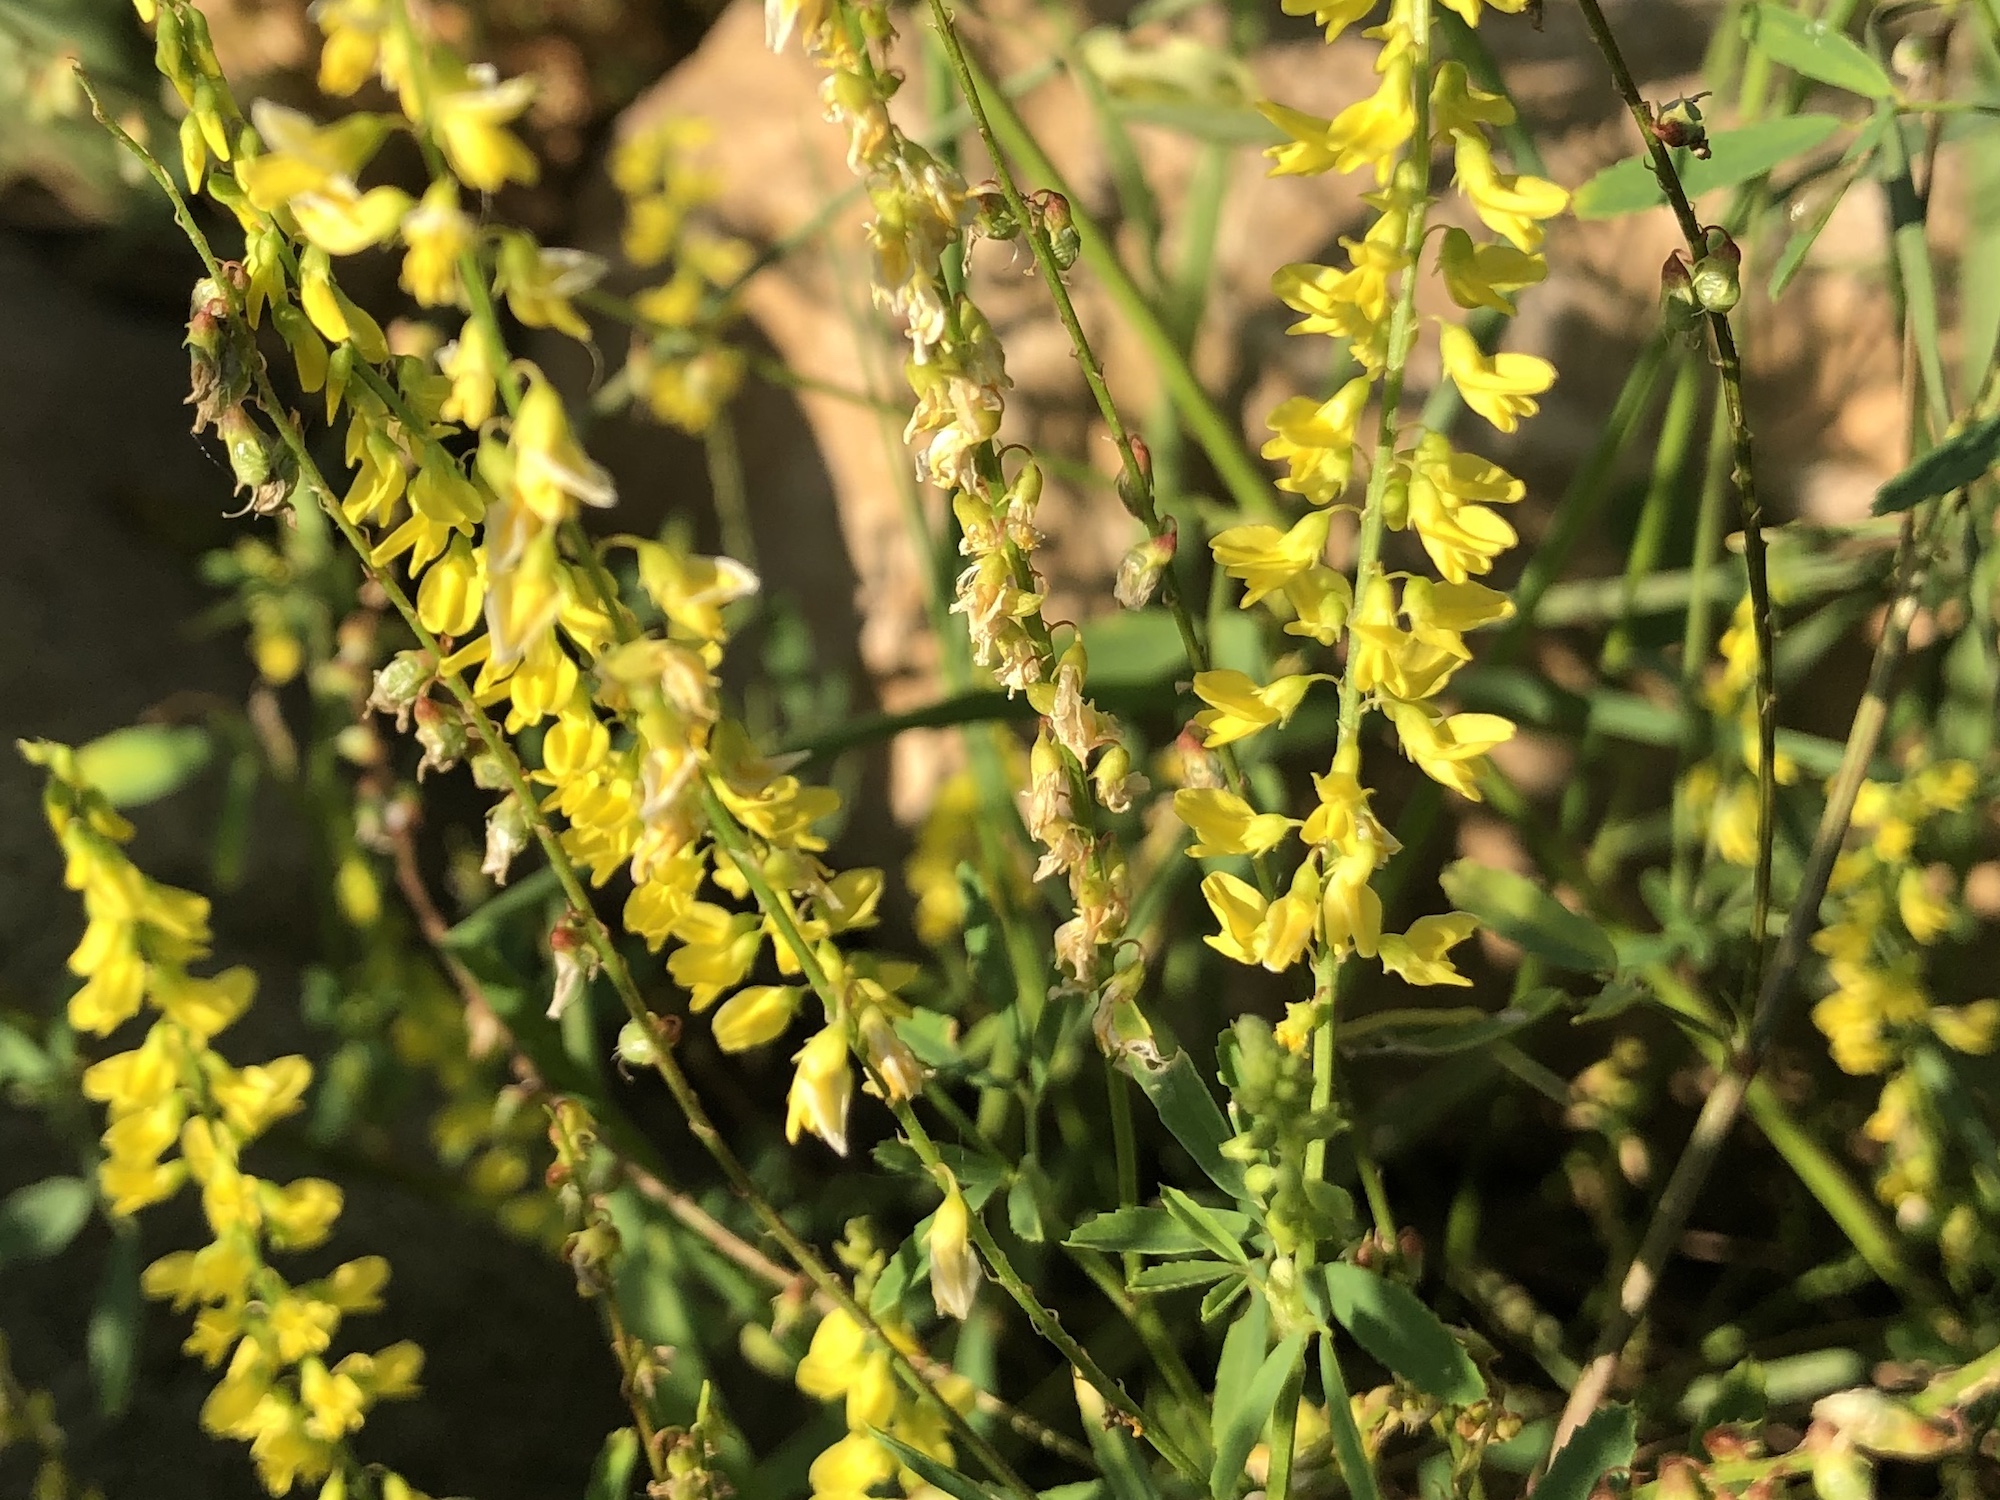 Yellow Sweet Clover by Duck Pond on July 11, 2019.